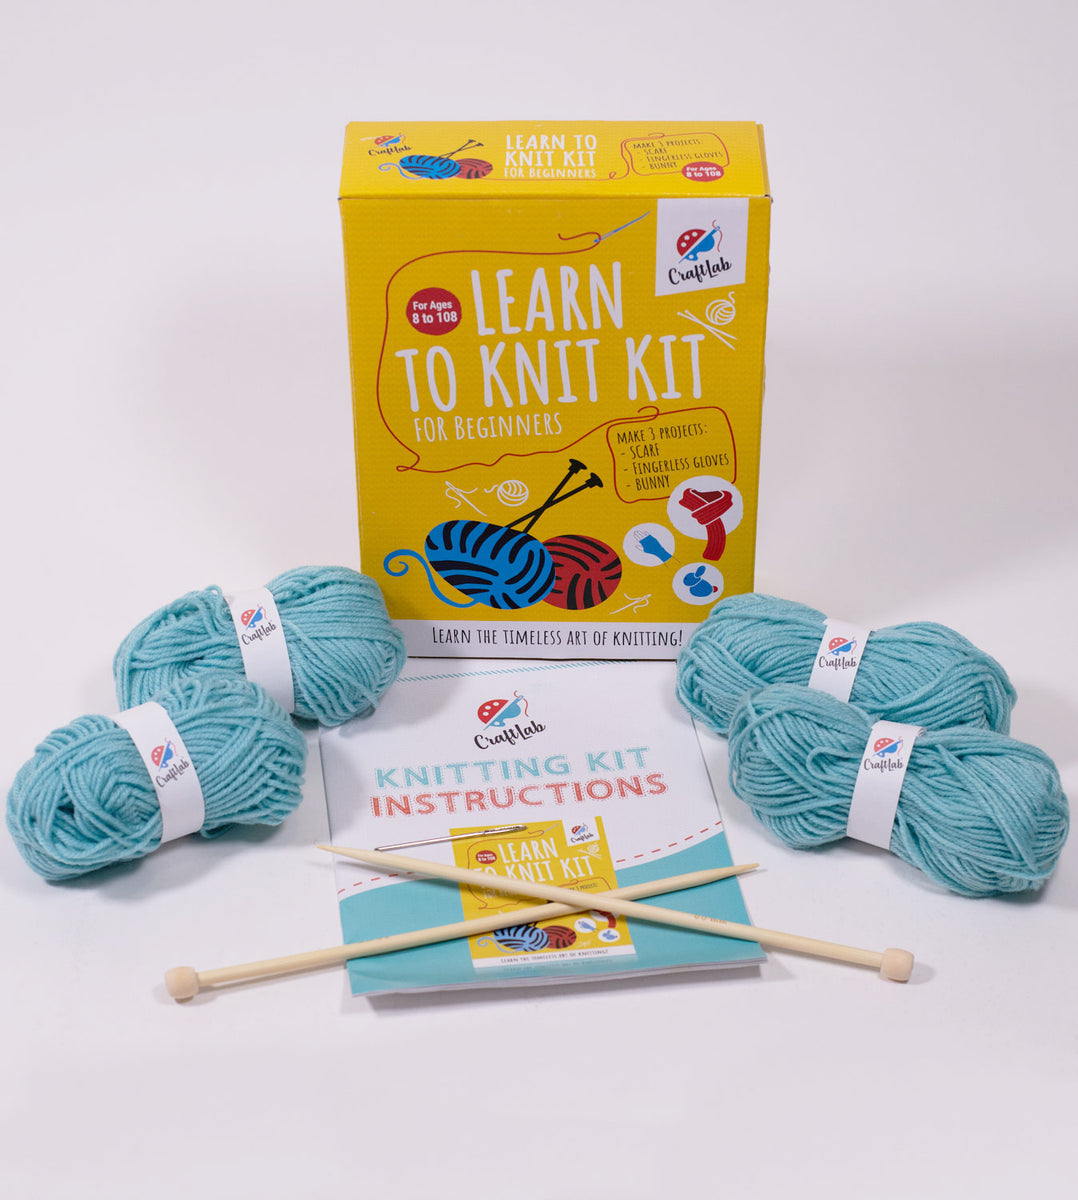 All Things You LEARN TO KNIT KIT Project Book & 7” (18cm) Size 8 (5mm)  Needles